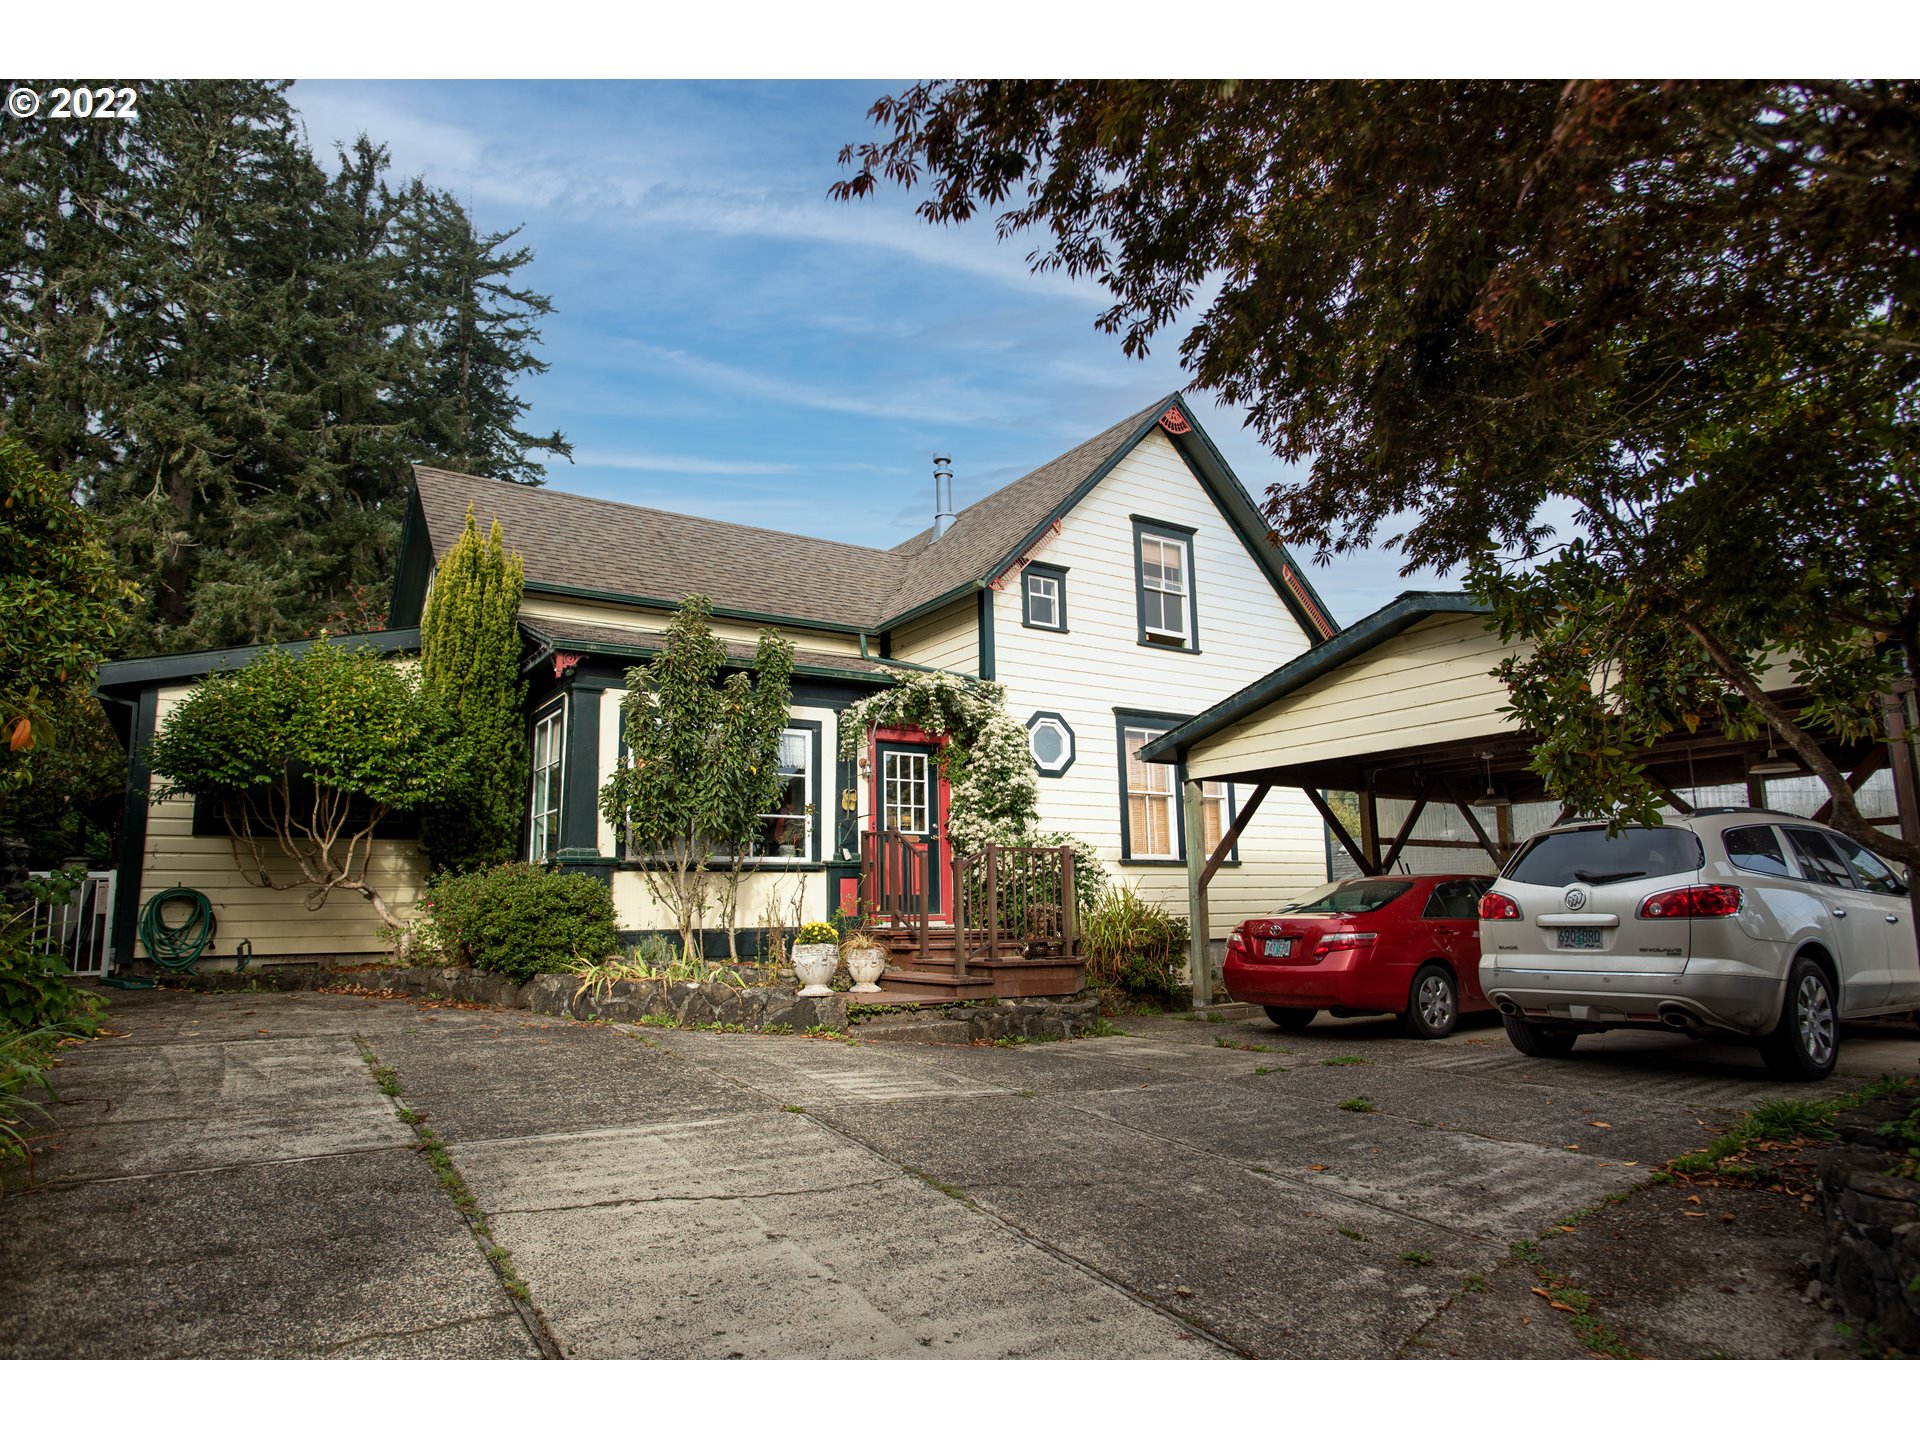 573 S 12TH ST, Coos Bay, OR 97420